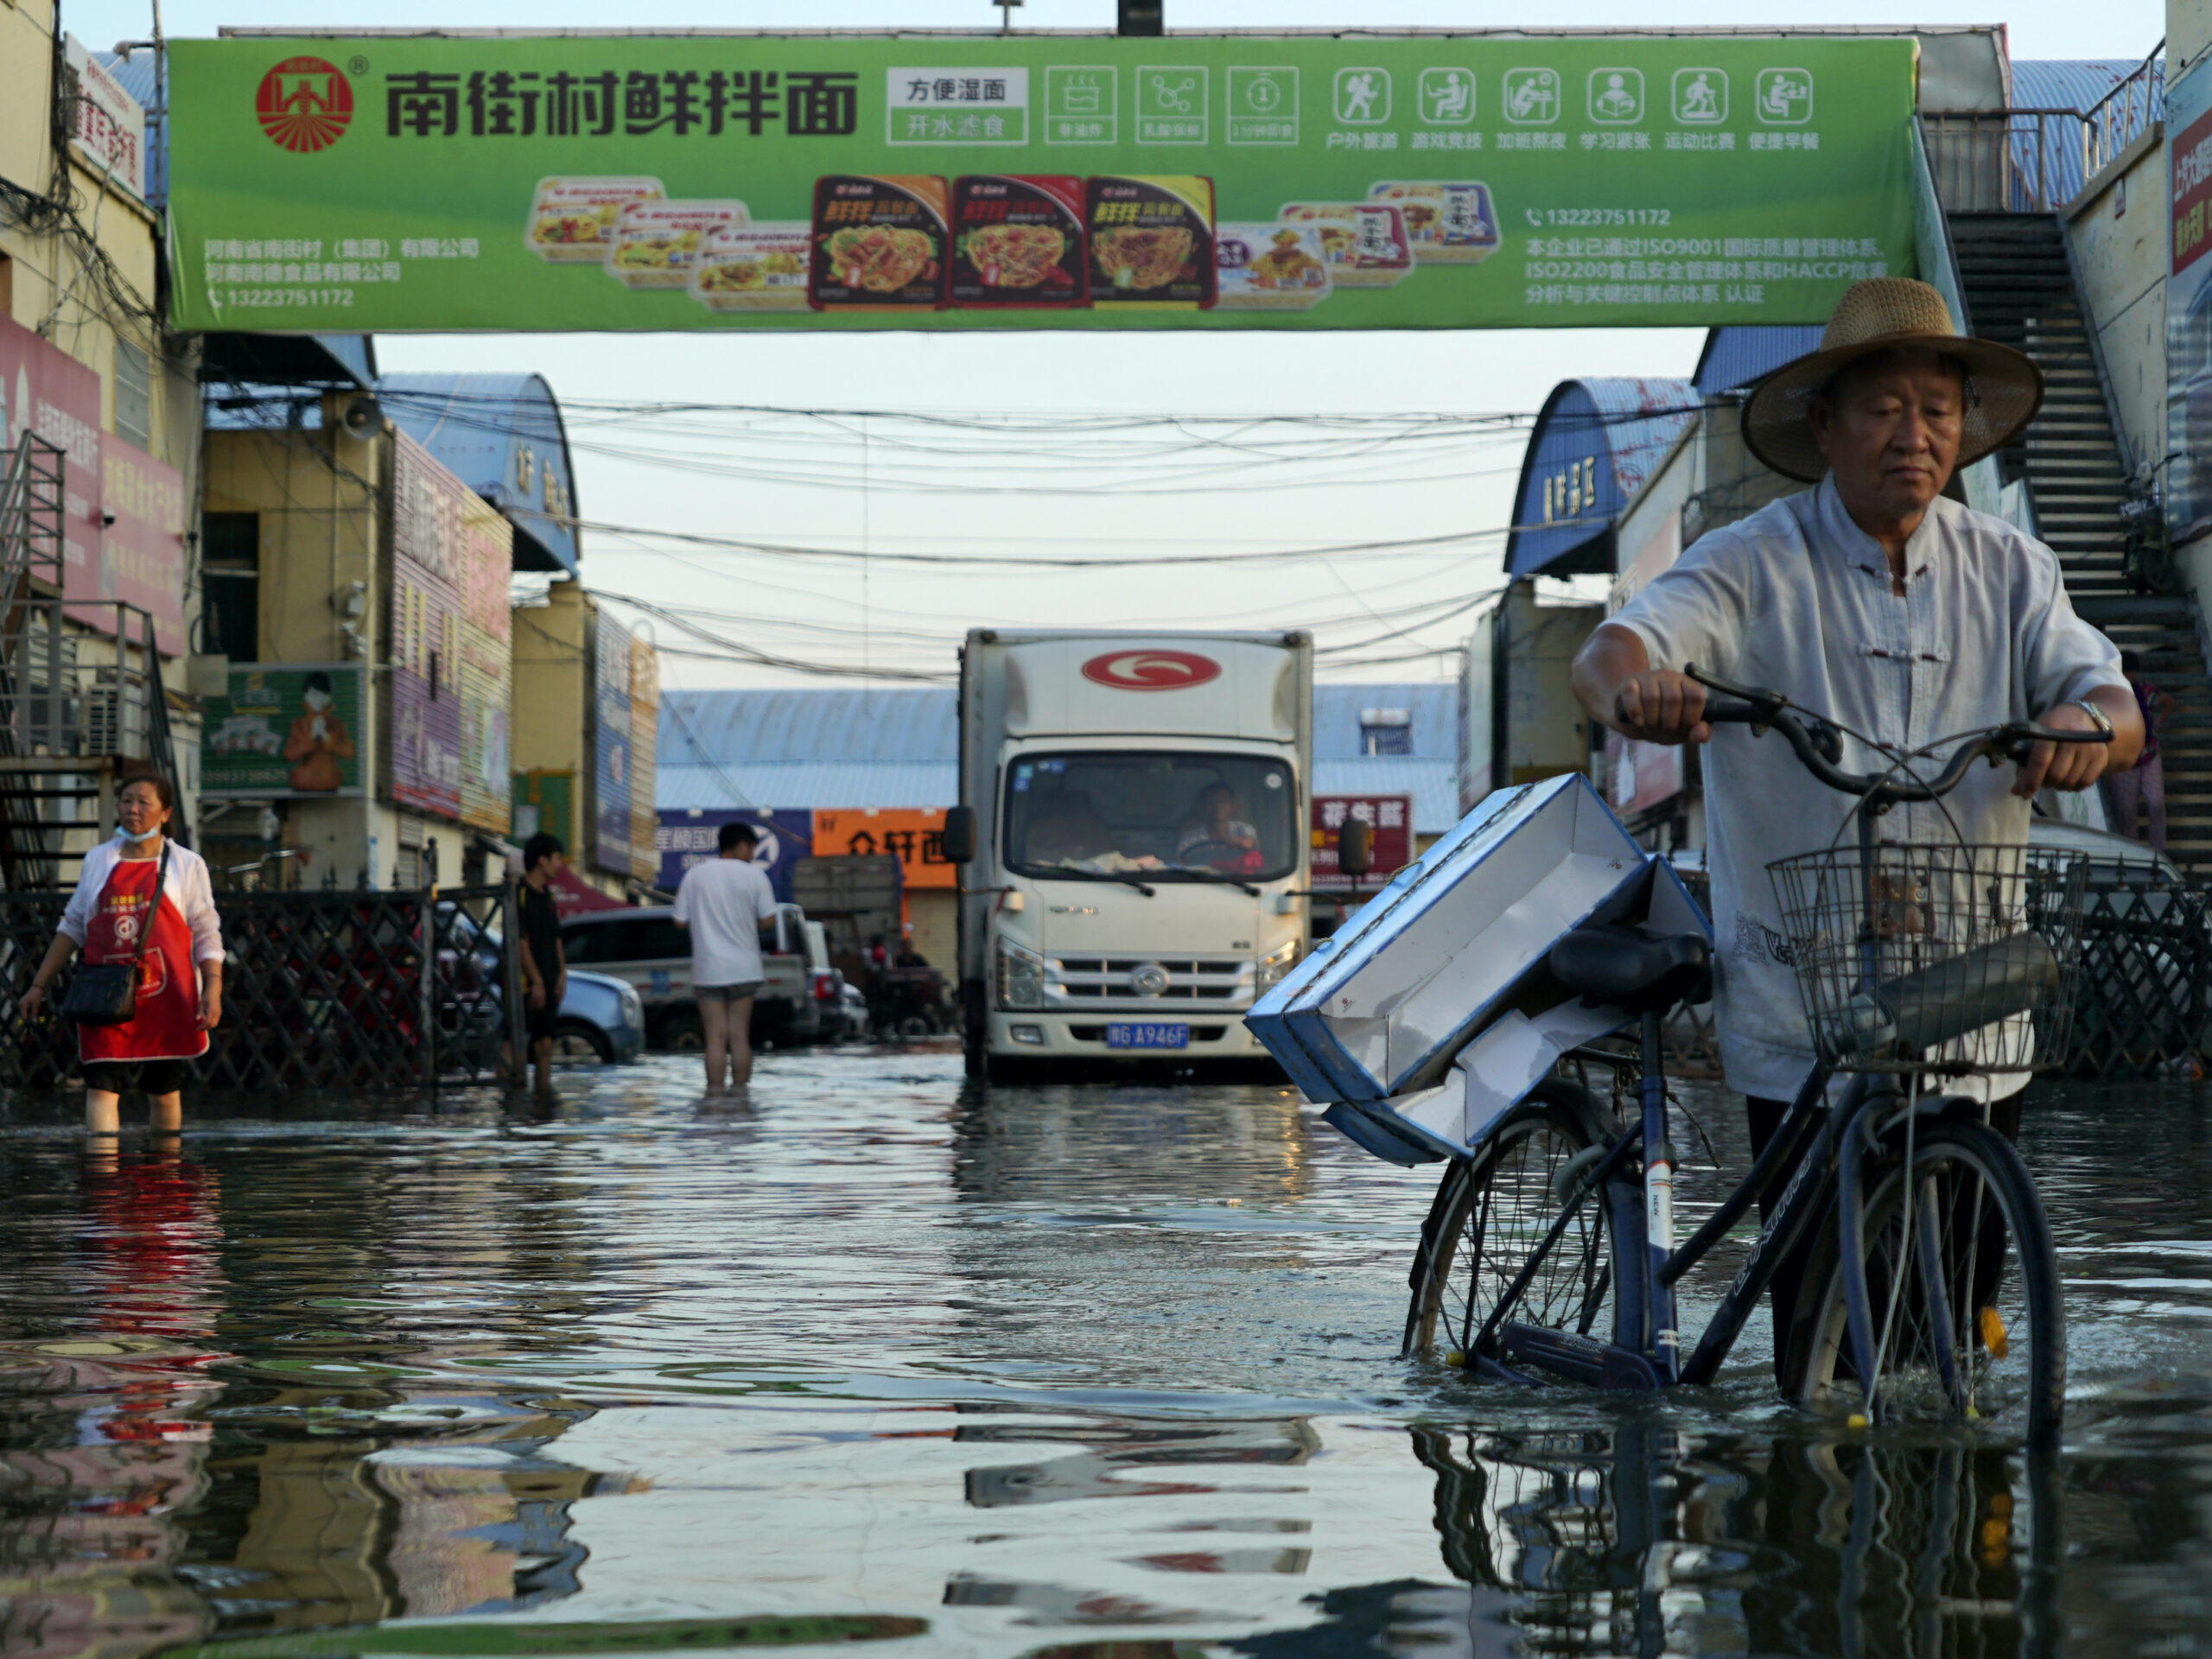 A truck tries to drive through a flooded street as other people walk and one man pushes a bicycle.